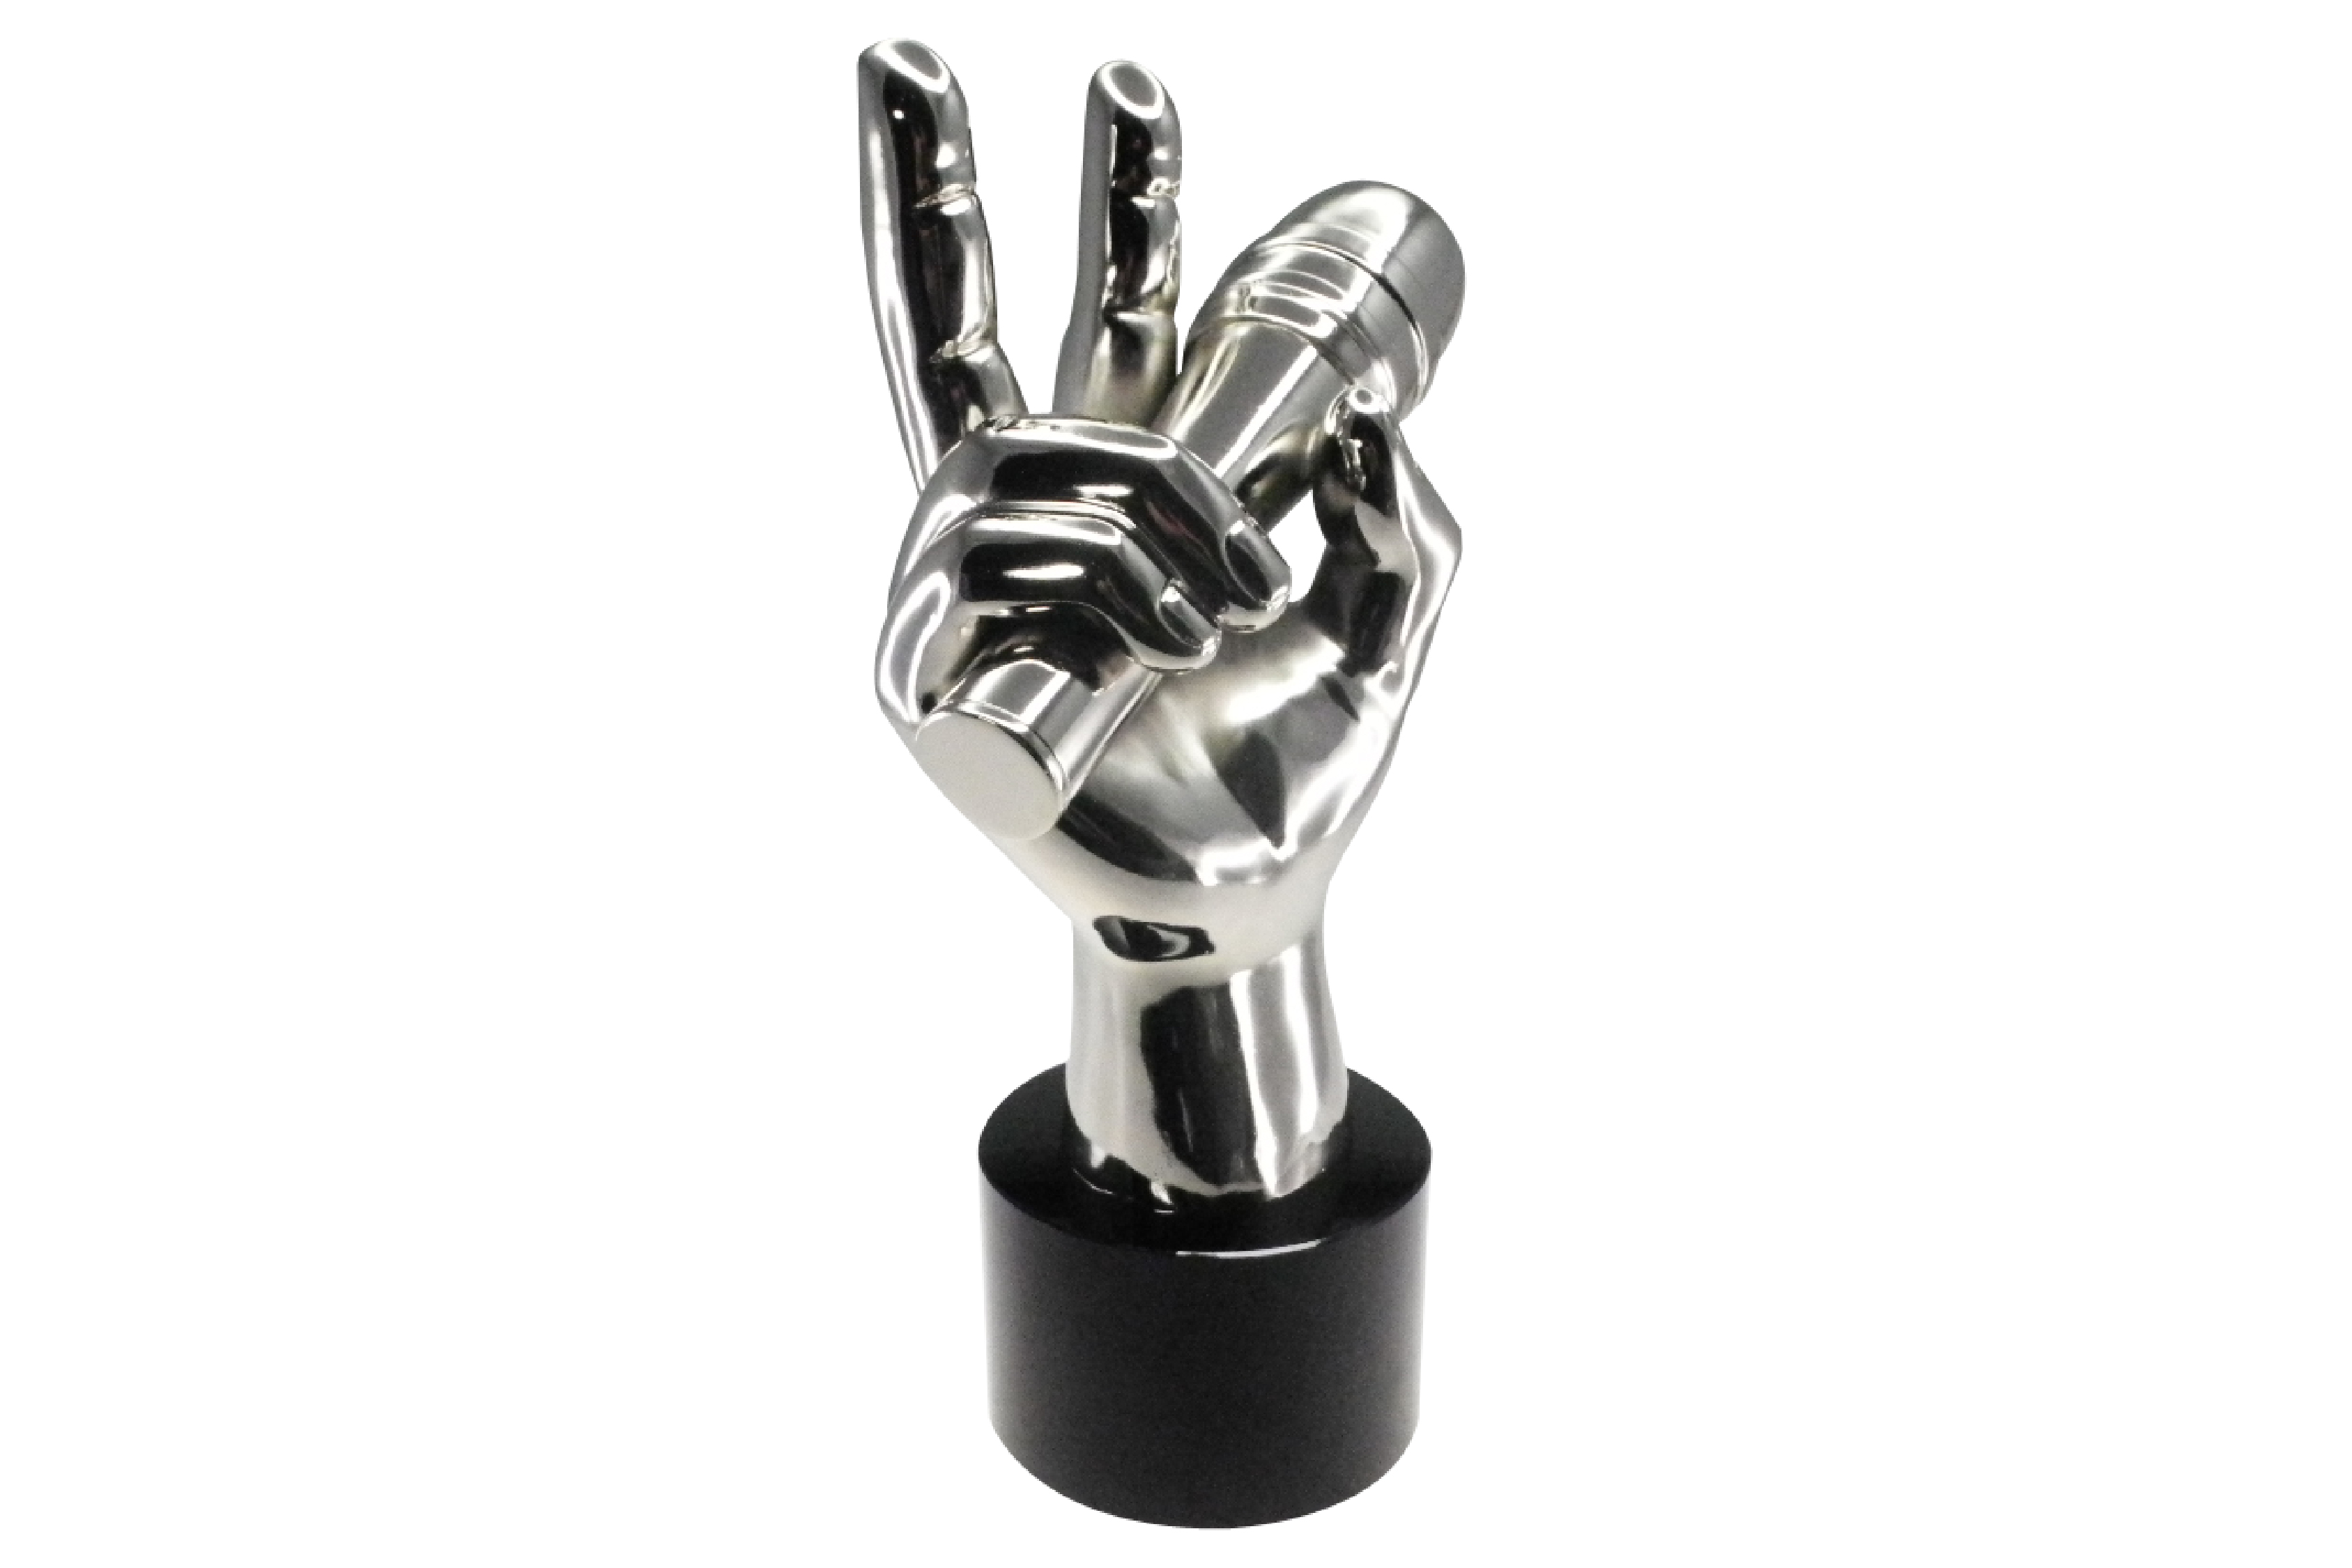 Trophy from NBC's The Voice singing competition. Award is a metal hand holding a microphone and giving a peace sign